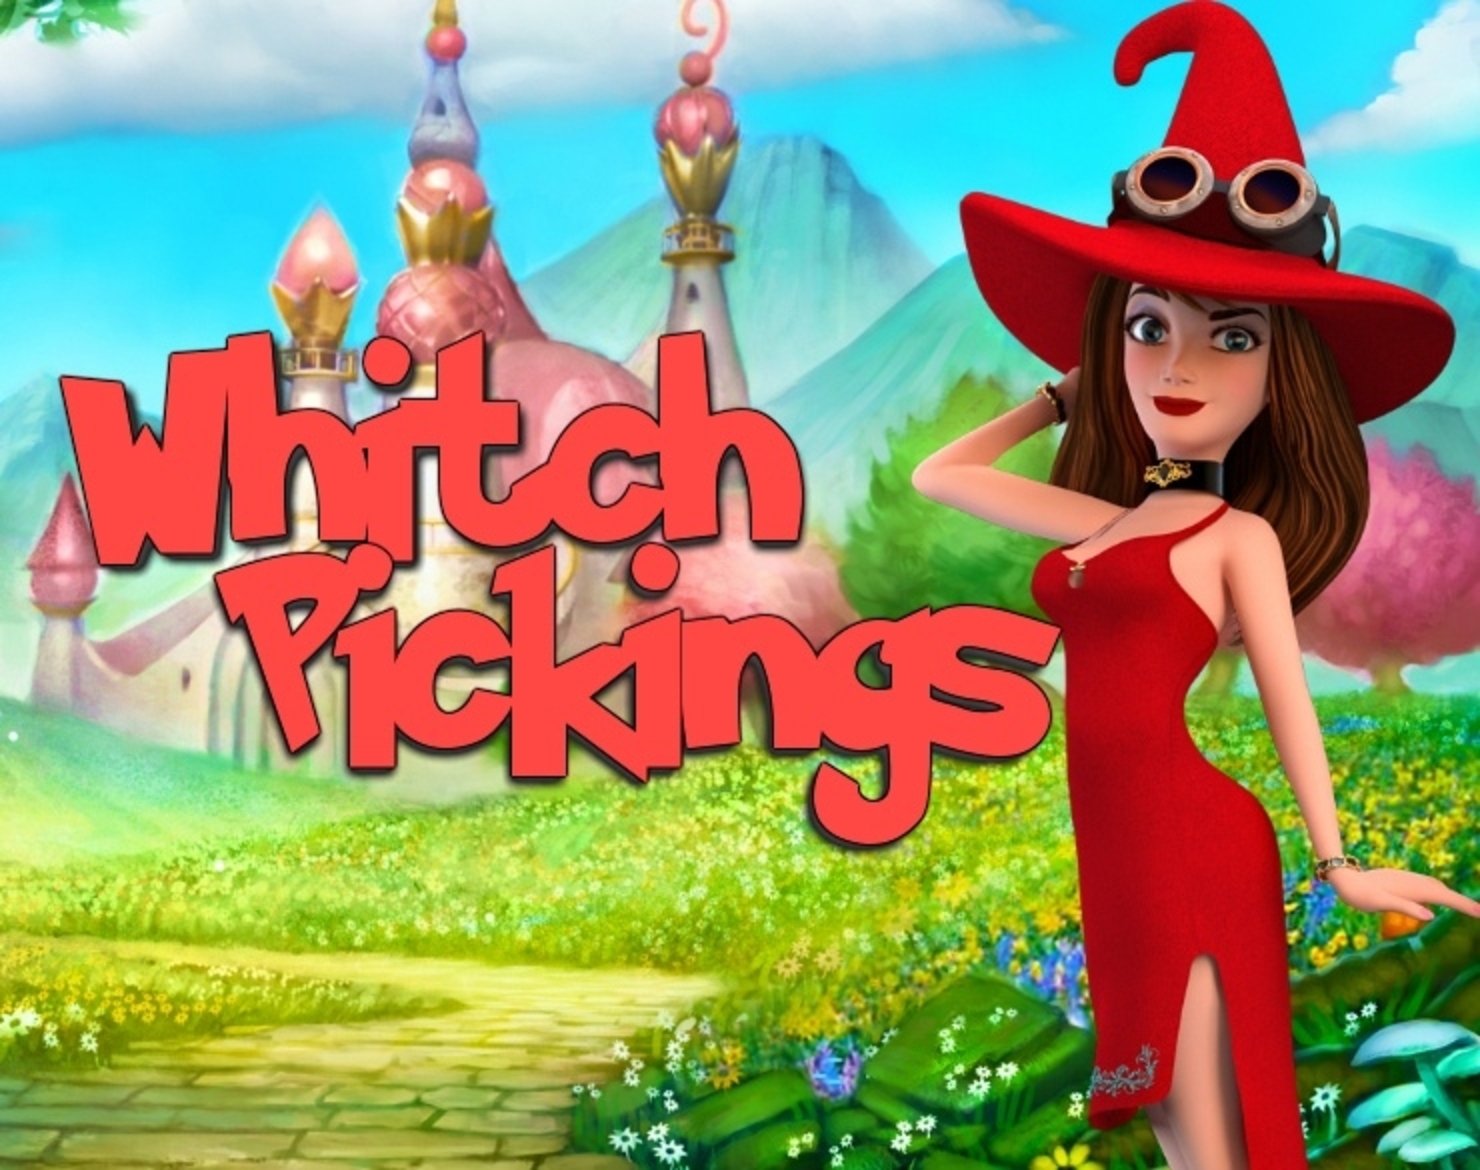 Witch Pickings demo